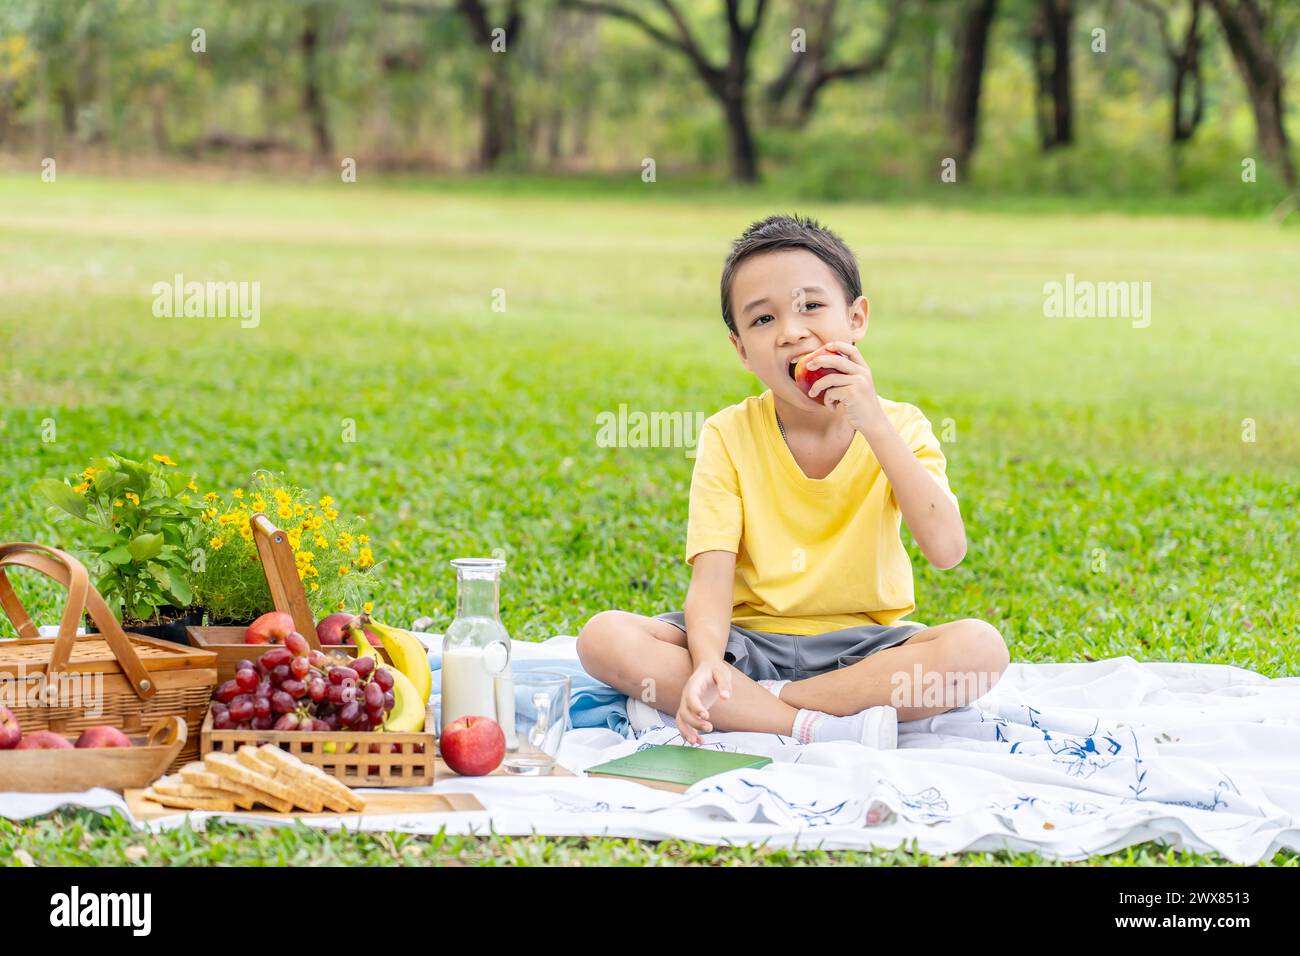 A child enjoying an apple and berries on a picnic blanket with assorted food Stock Photo